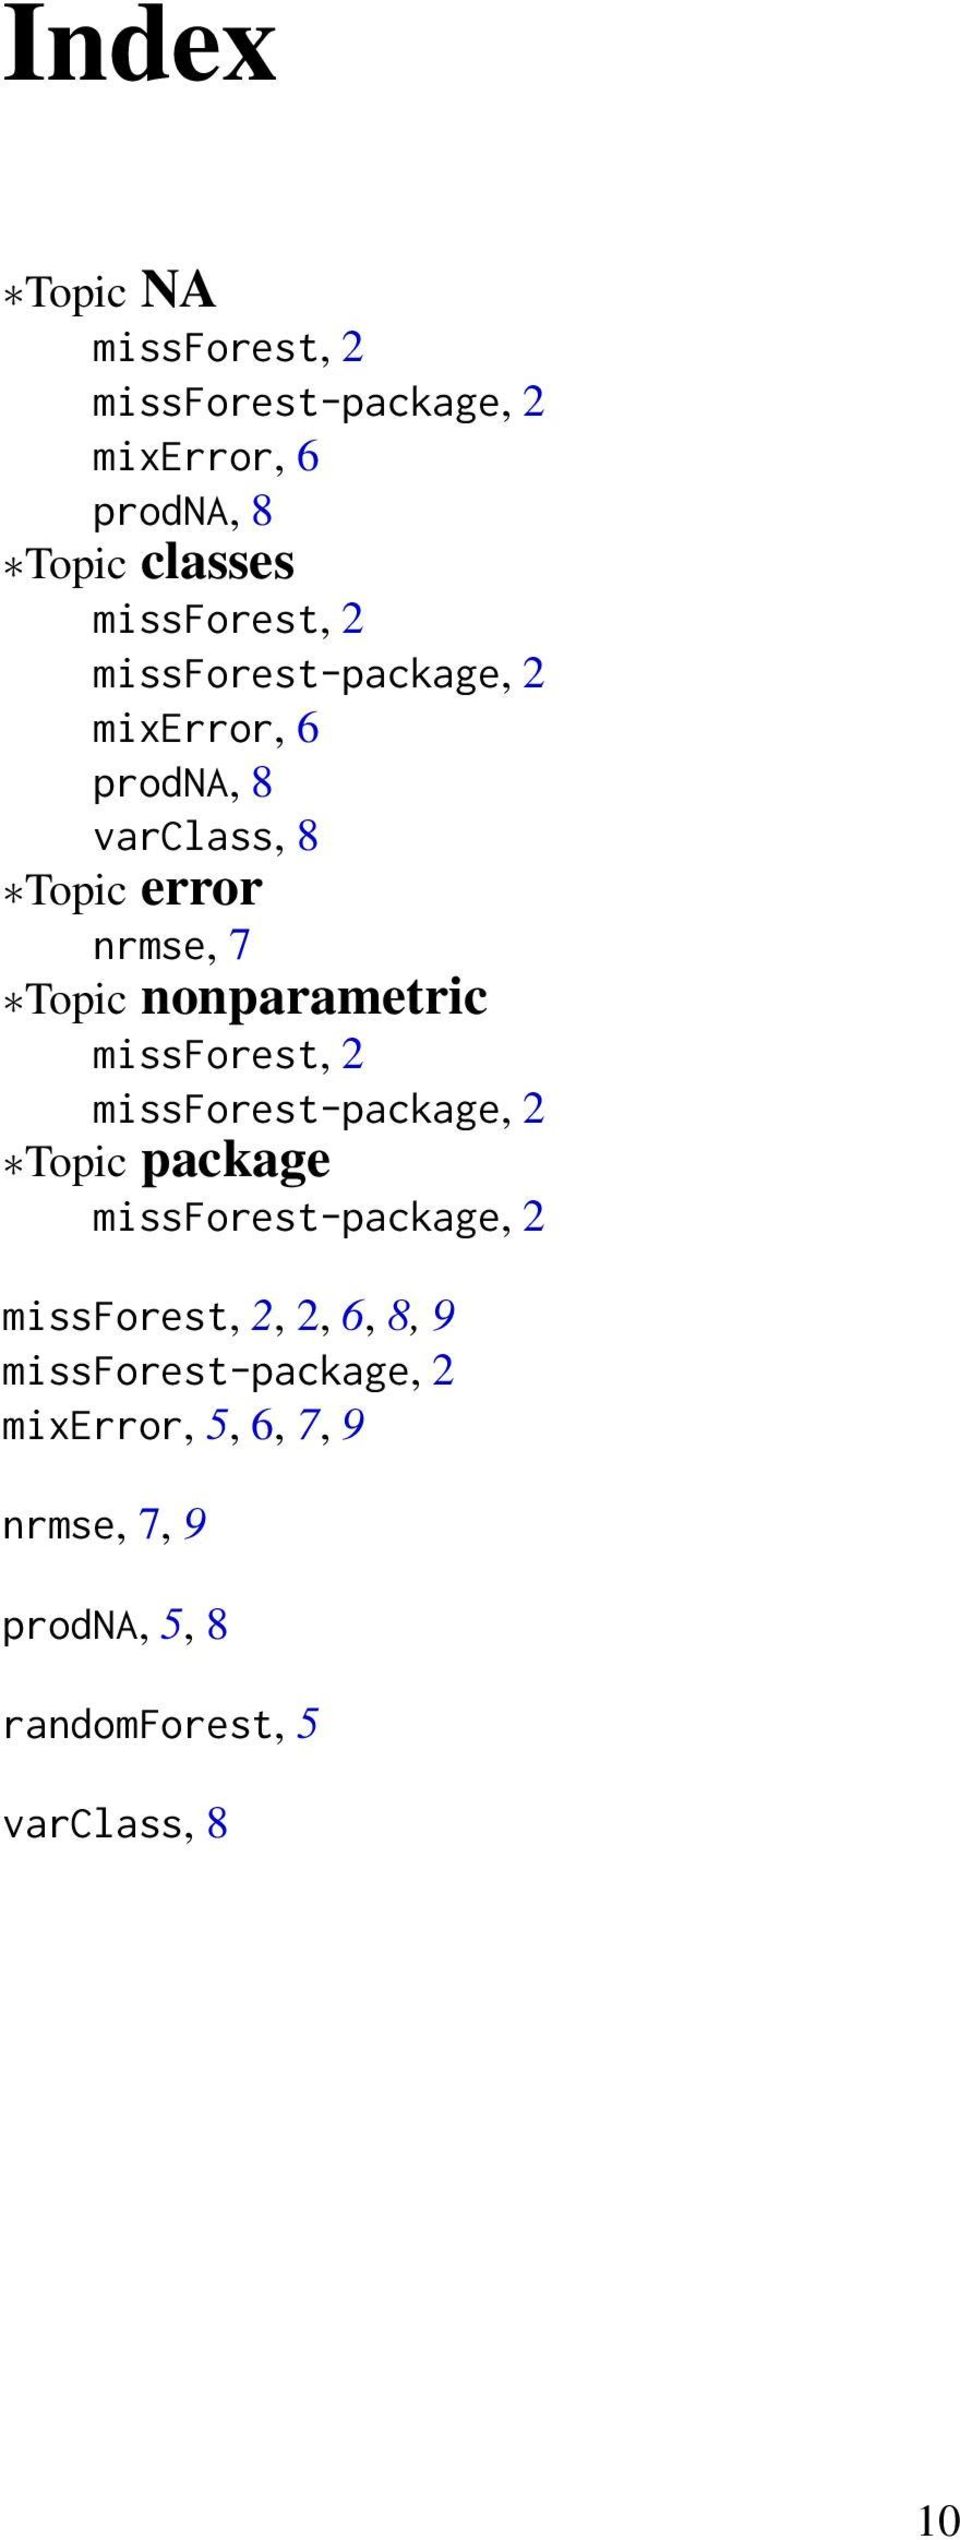 missforest, 2 missforest-package, 2 Topic package missforest-package, 2 missforest, 2, 2, 6, 8, 9